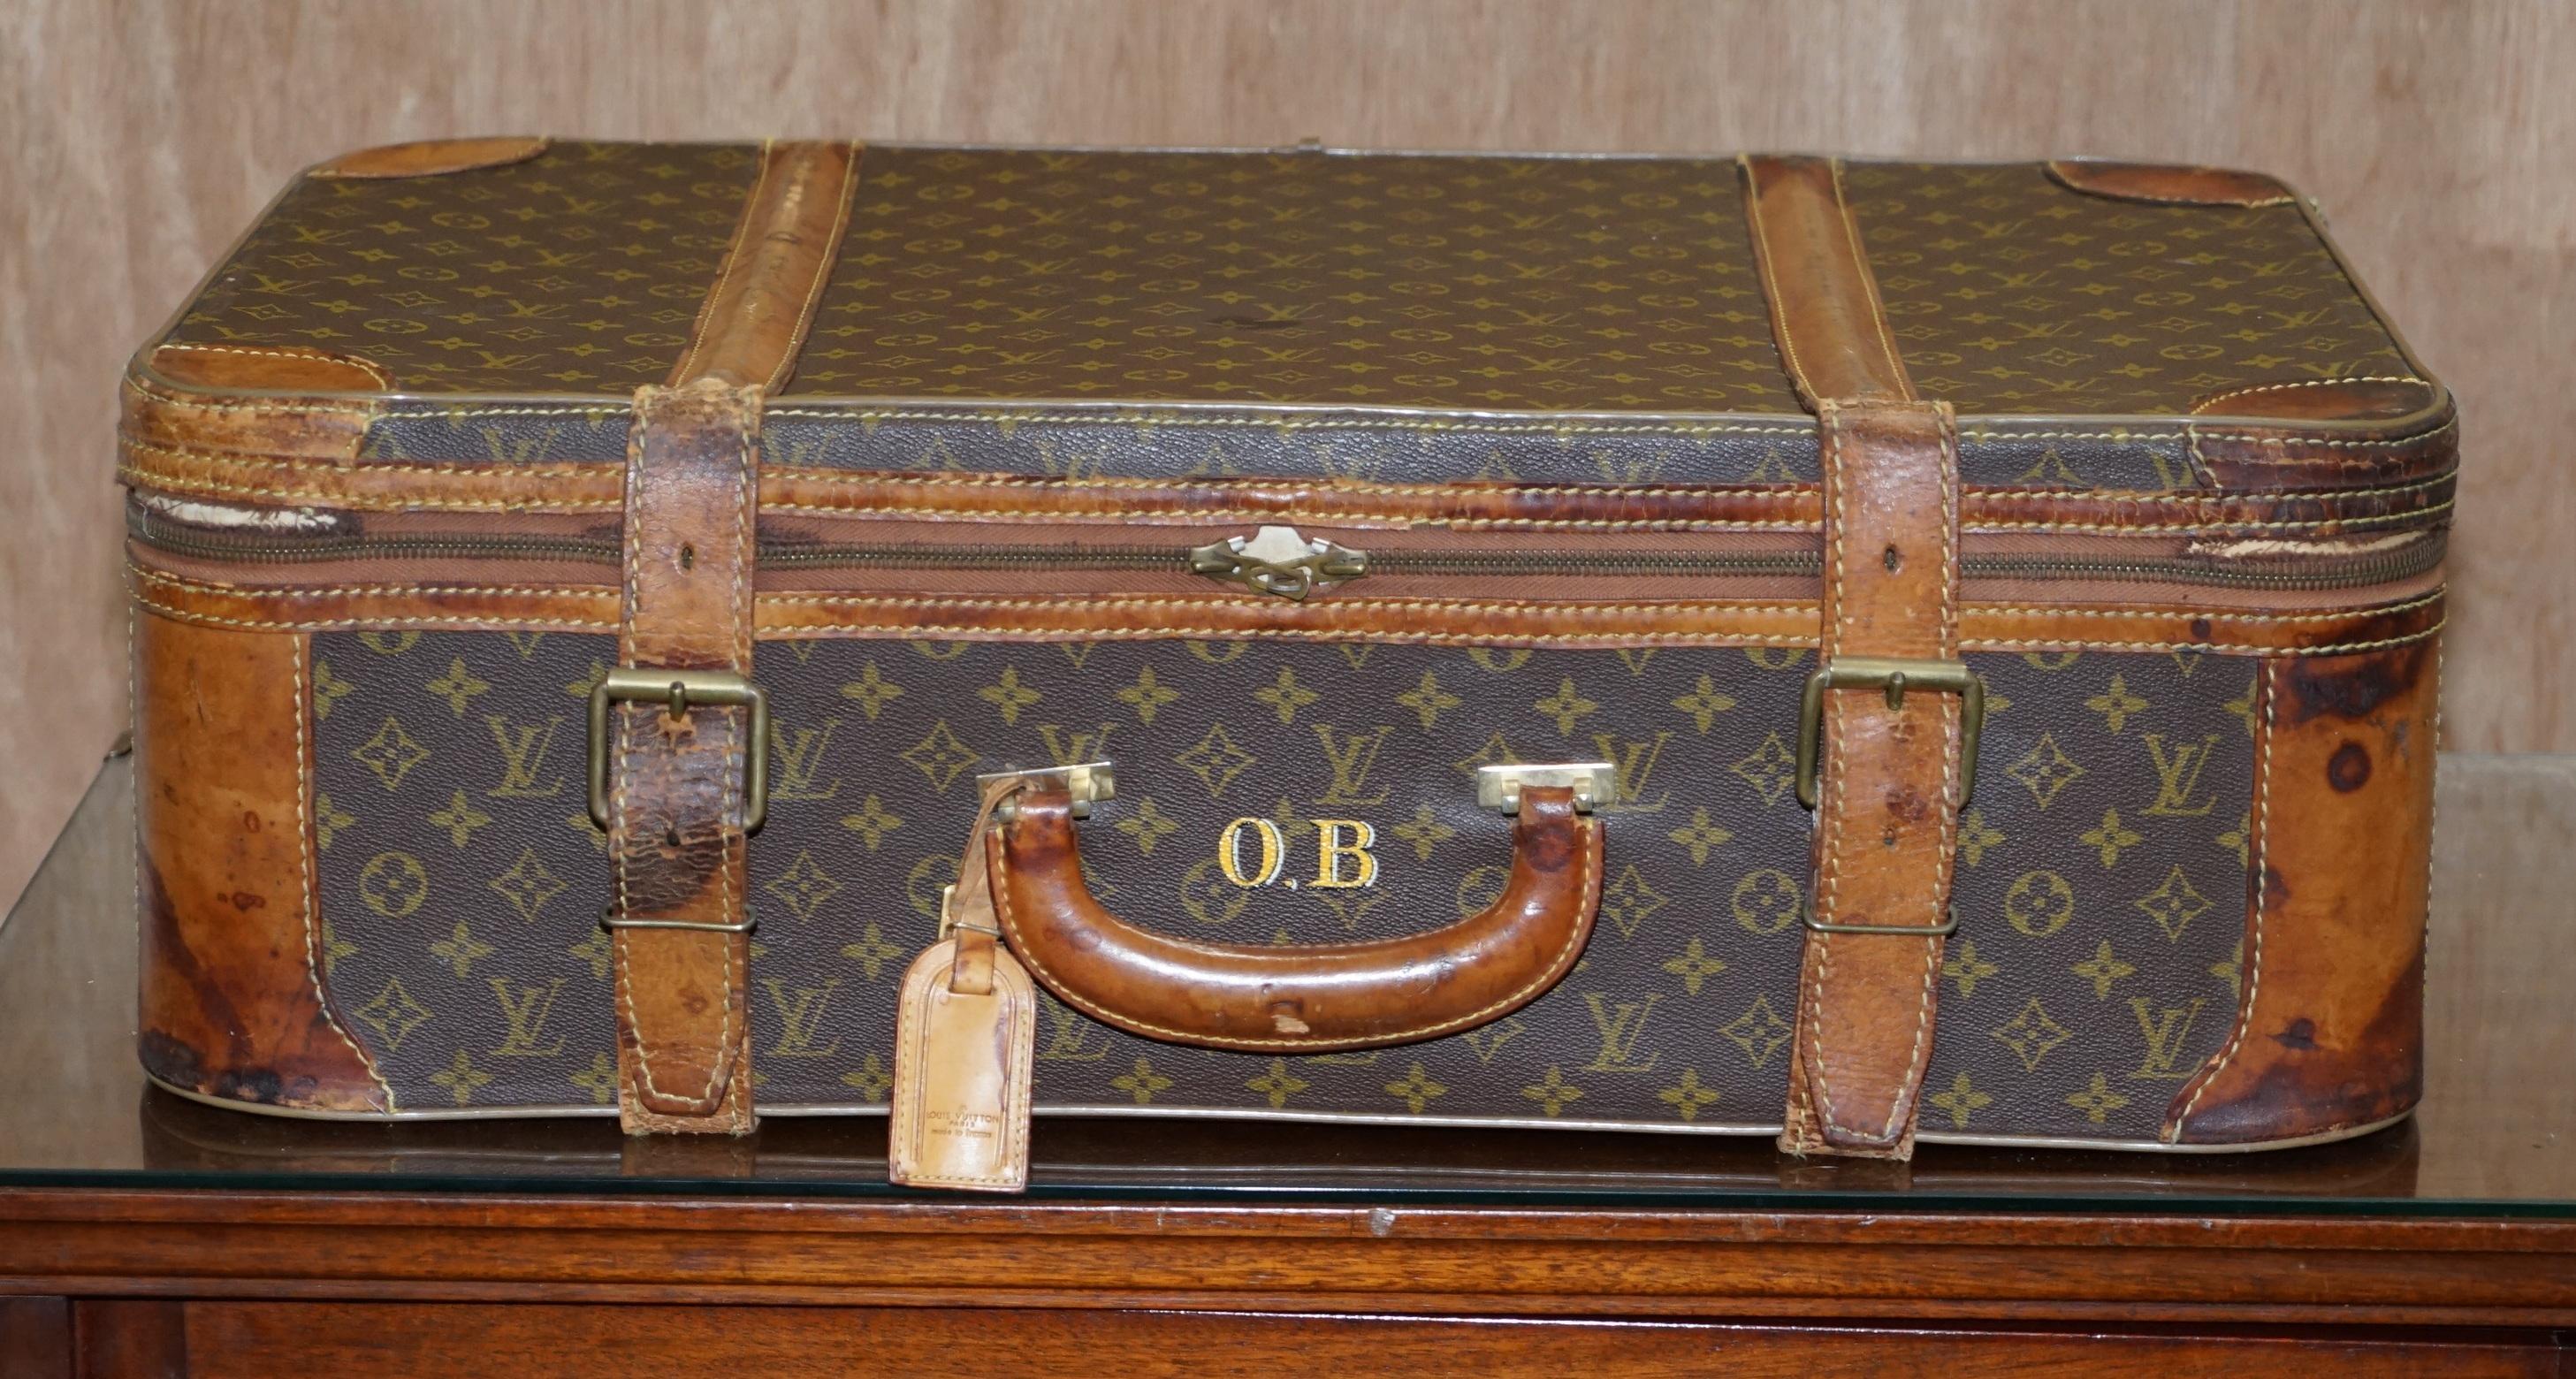 We are delighted to offer for sale 1 of 2 original vintage brown leather strapped Louis Vuitton suitcases with original swing tag and bronze buckles

This listing is for one, the other is listed under my other items

A very good looking and well